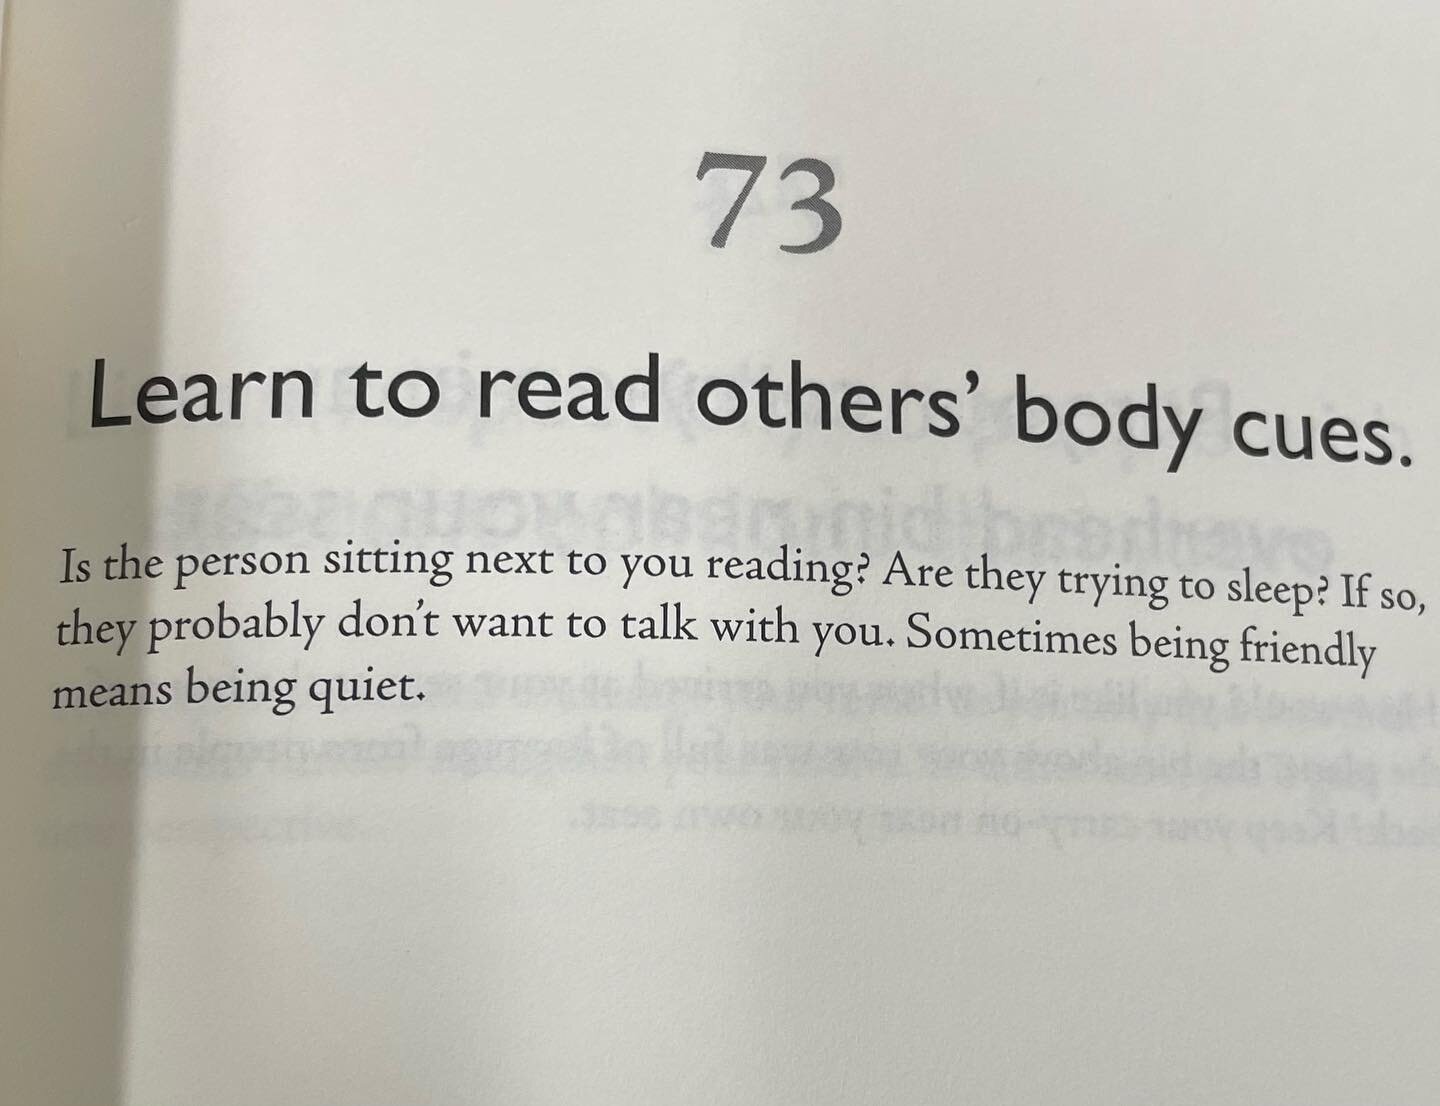 When I open a book to put a hold slip in it, I occasionally land on the perfect page. 📣Sometimes! Being friendly! Means being! Quiet!!!!!!!!